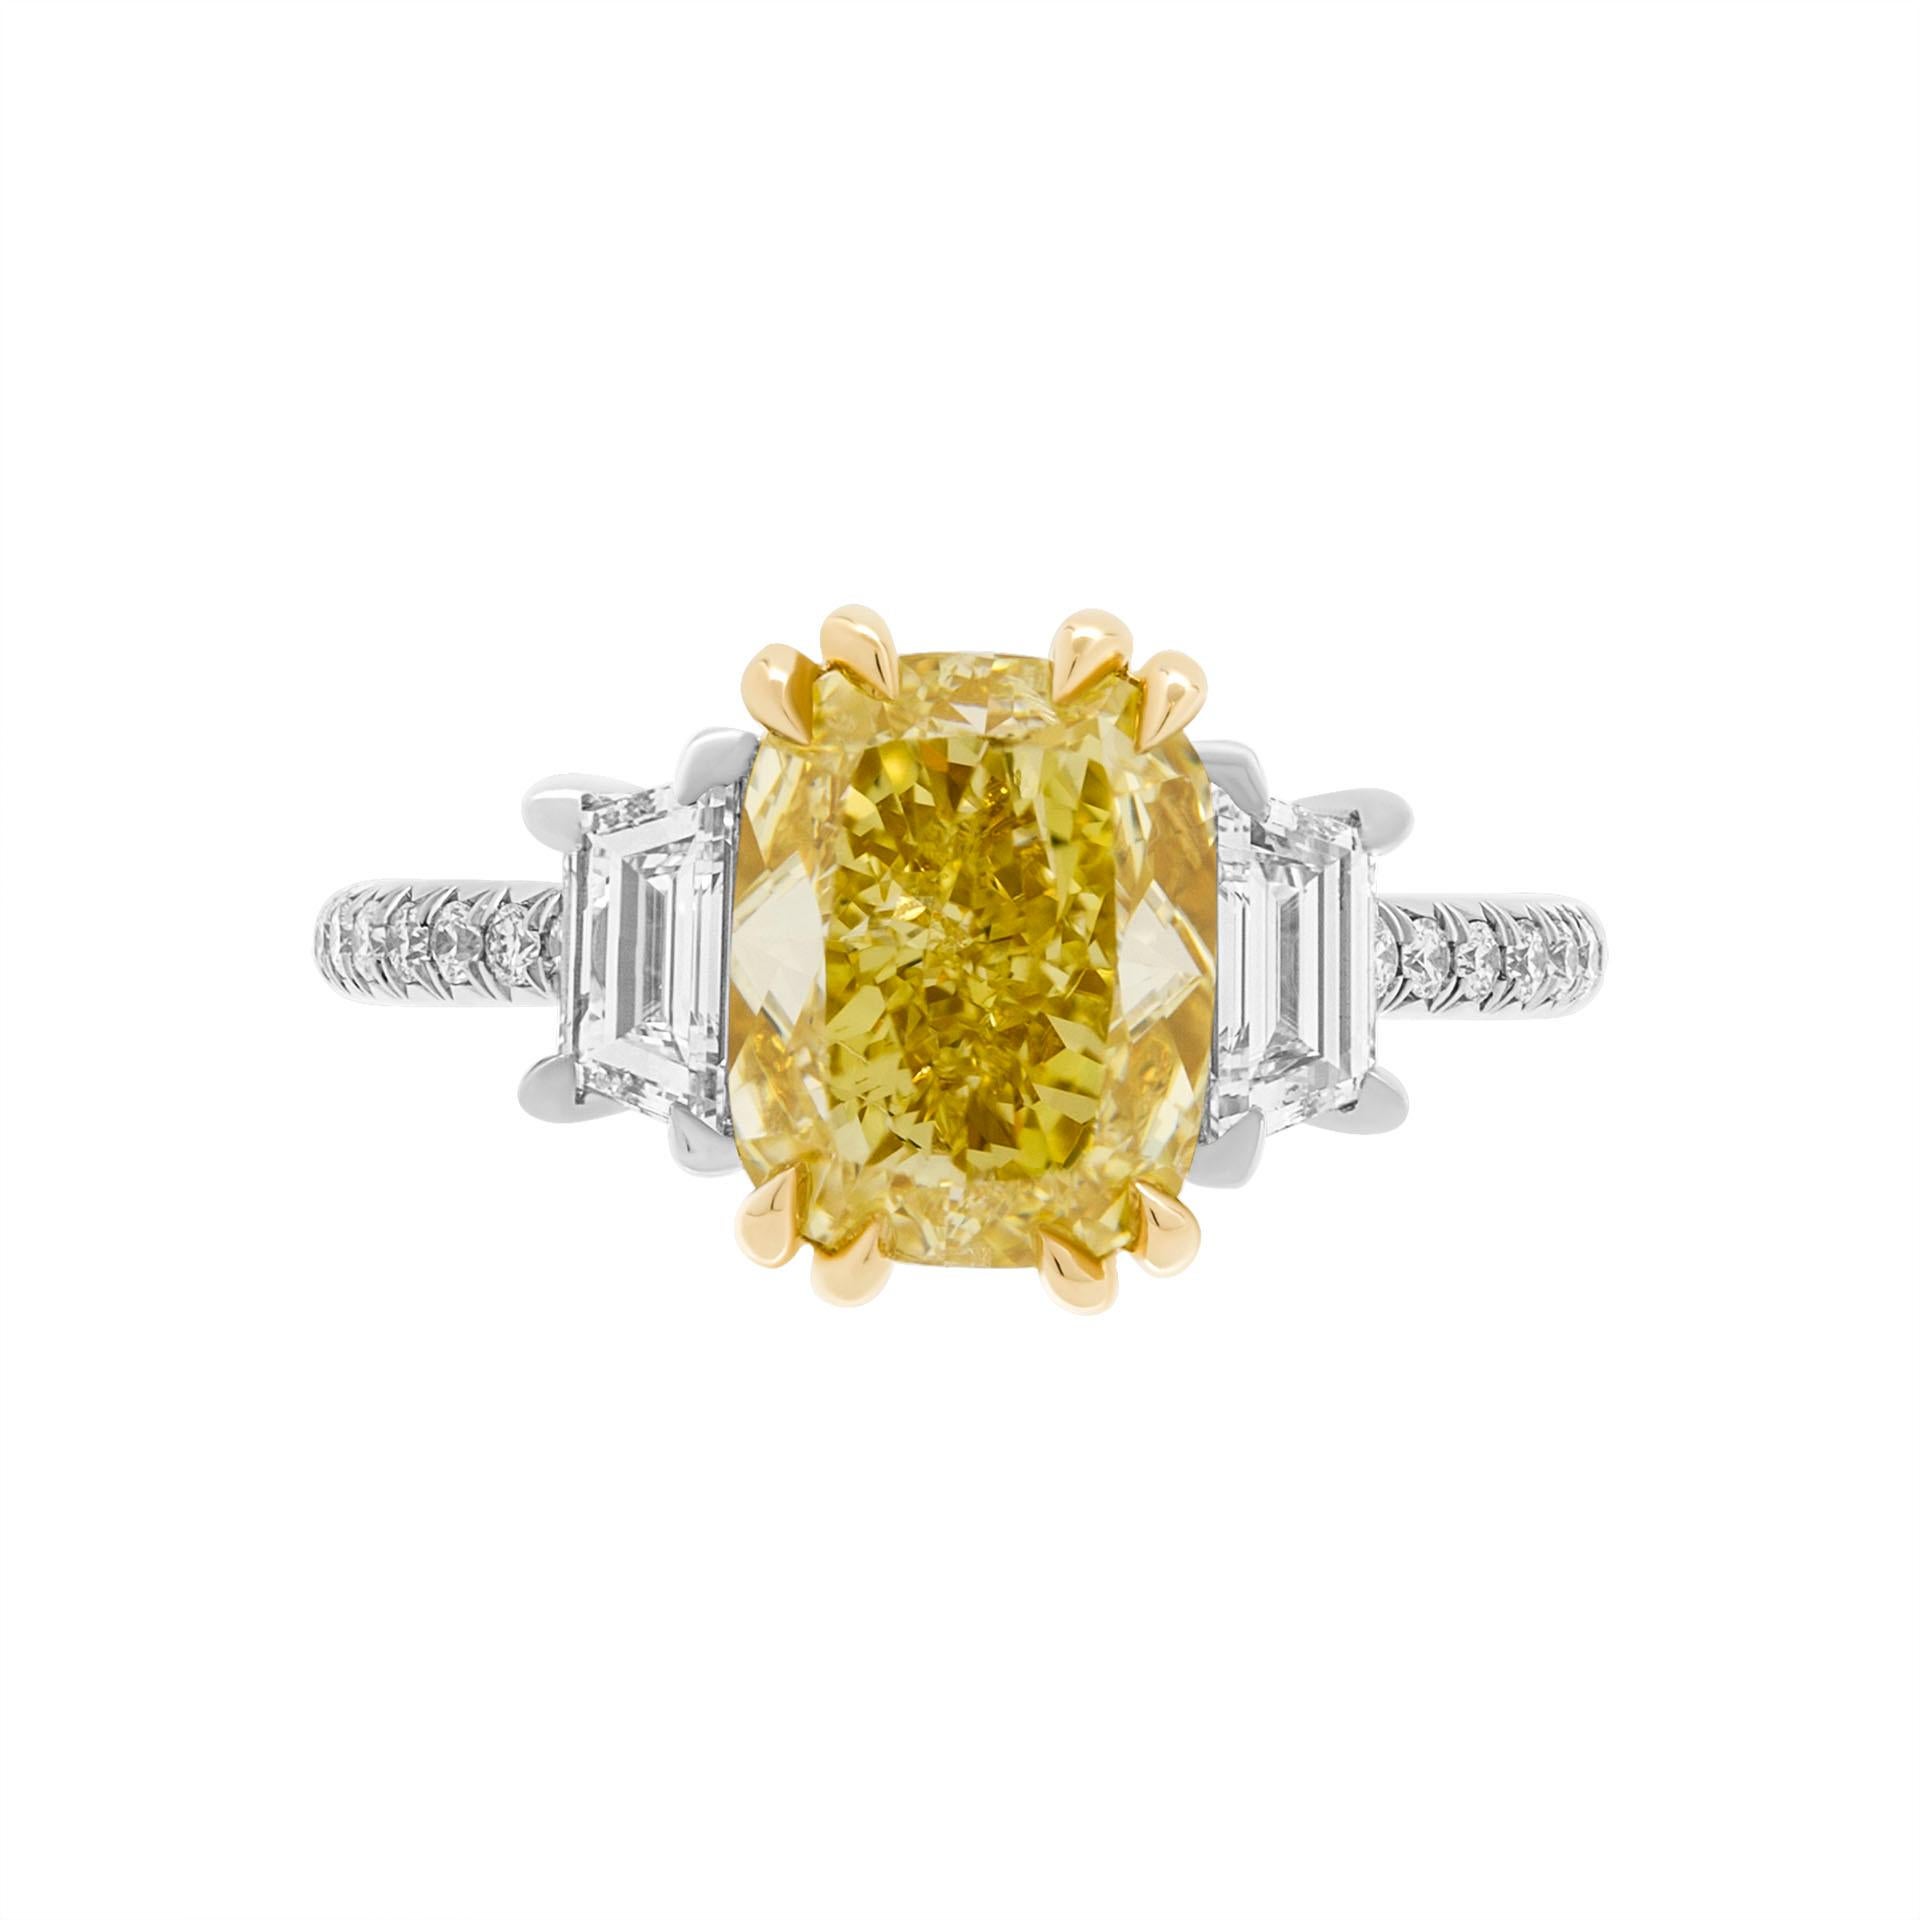 GIA Certified Engagement Ring with 3.01ct Fancy Yellow SI1 Cushion Diamond
Center stone: 3.01ct Natural Fancy Yellow Even SI1 Cushion shape diamond GIA#5221725333 
Side stone: 0.63ct F VS trapezoids 
Cathedral Pave shank, diamond bridge, wrap under